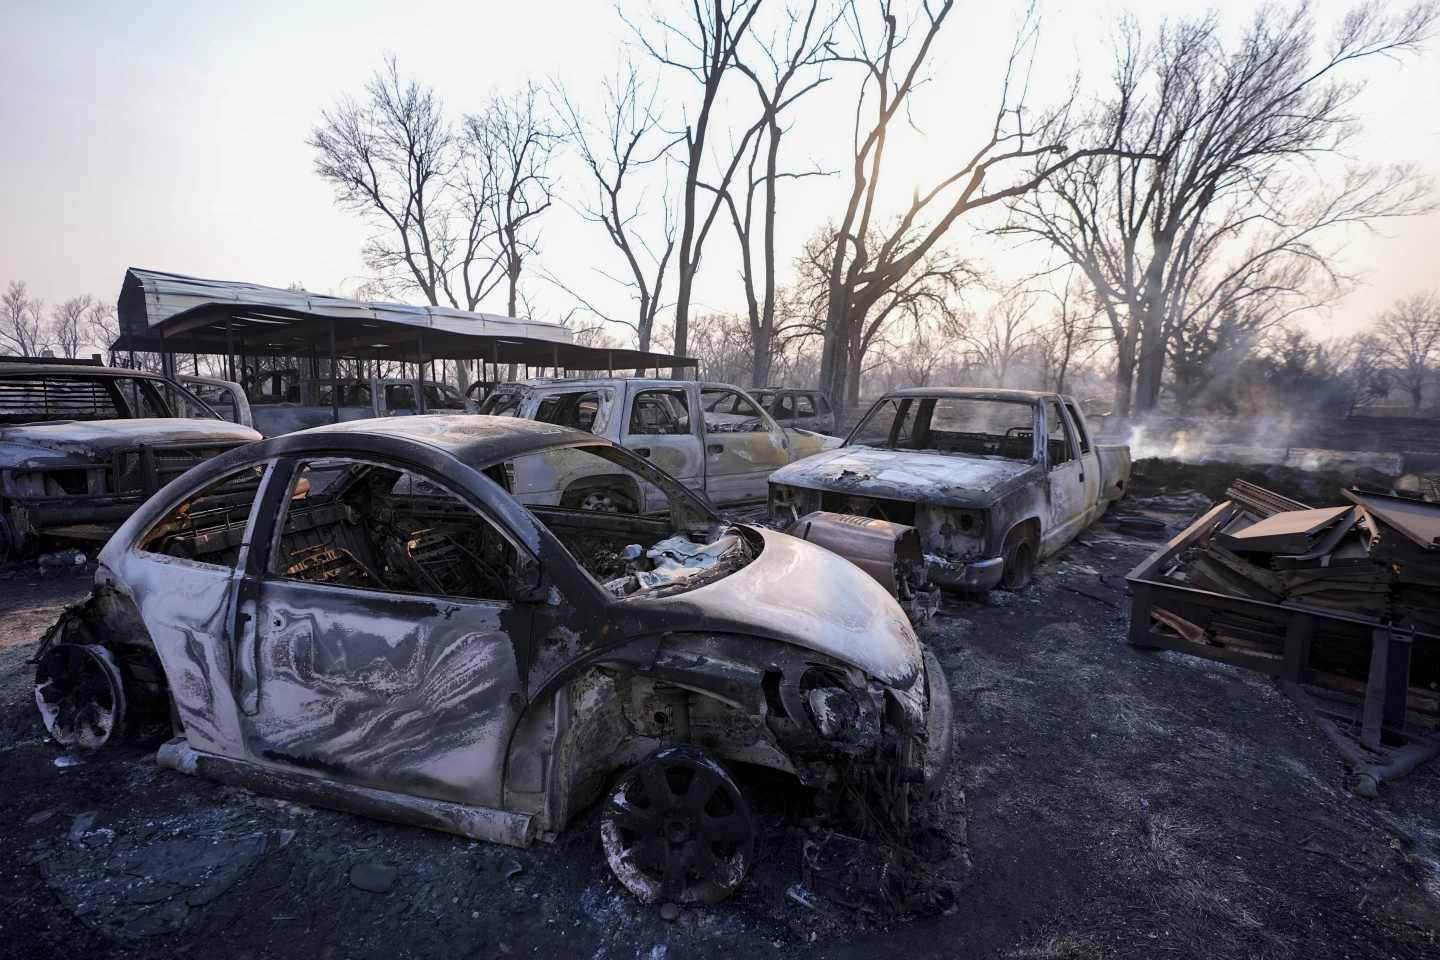 Wildfire one of largest in Texas history as flames menace multiple small towns